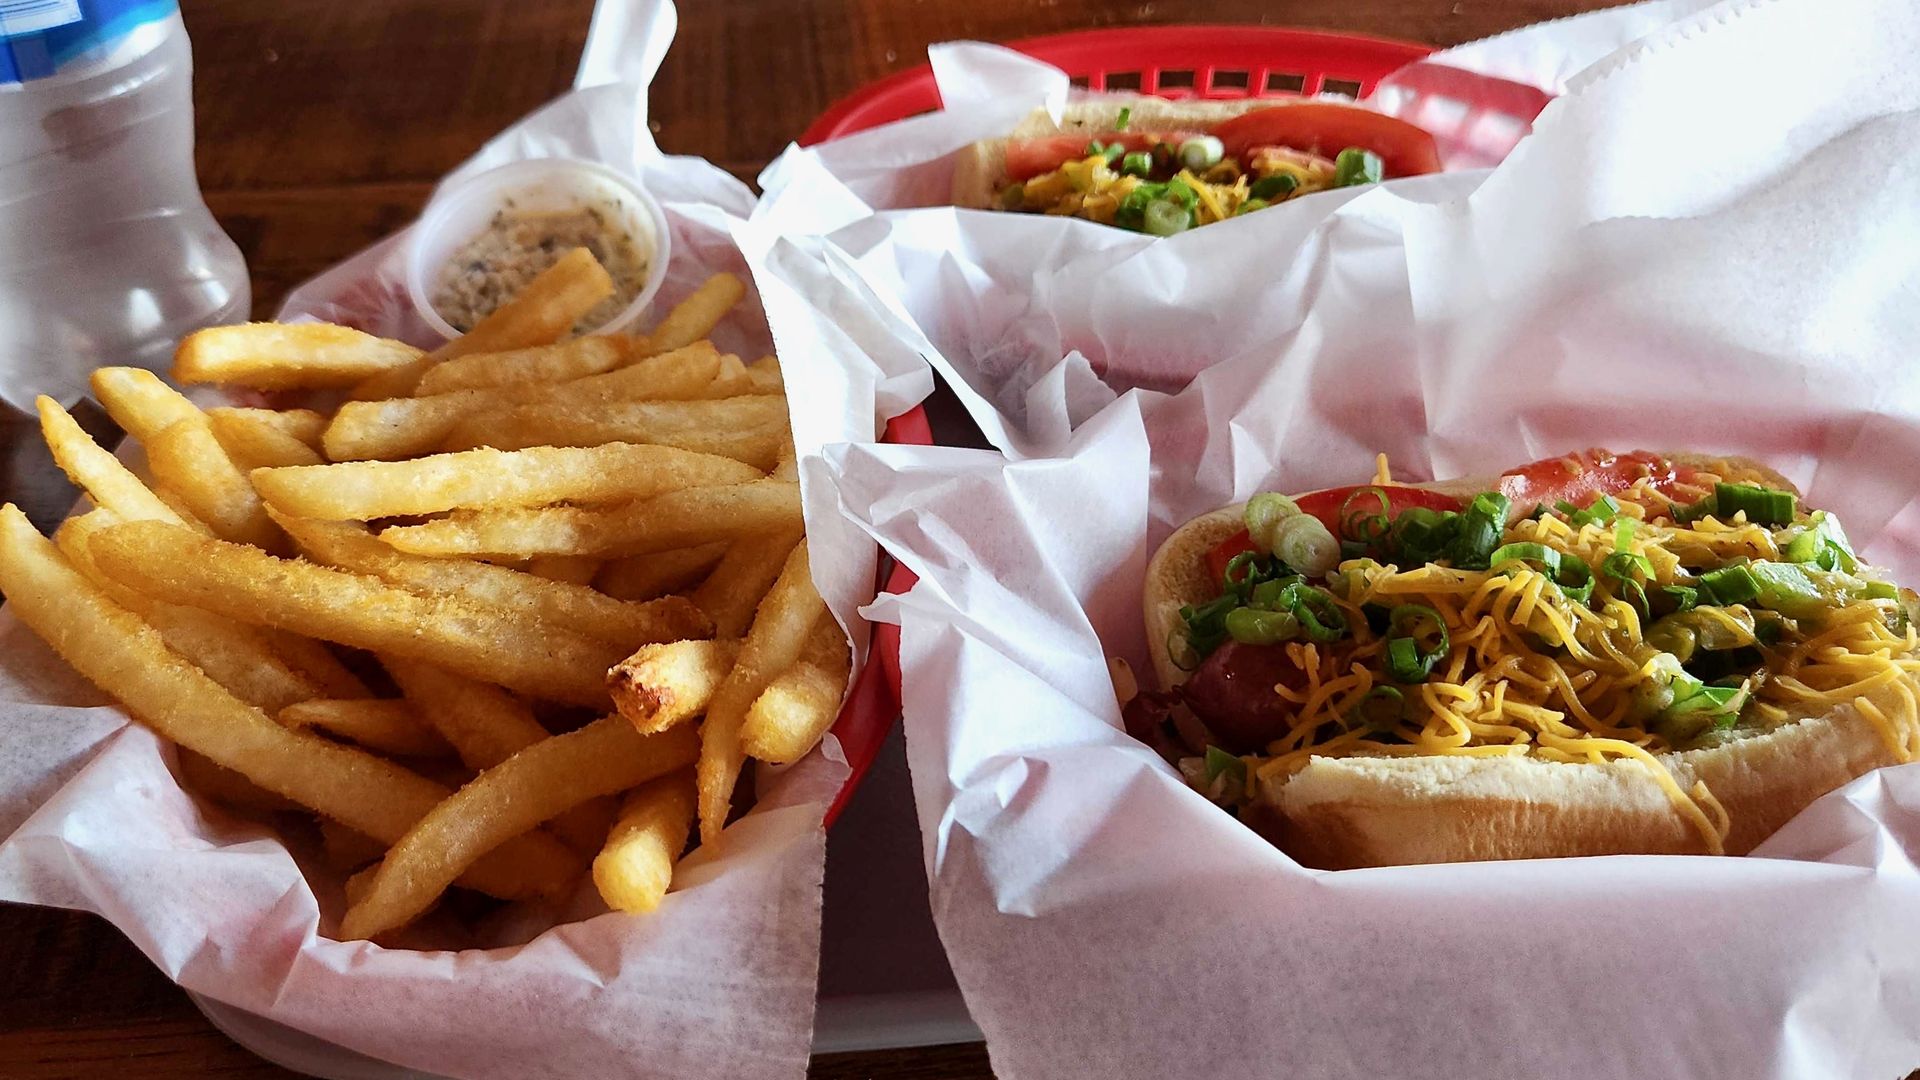 A close-up of a loaded hot dog and fries in red plastic baskets lined with white paper